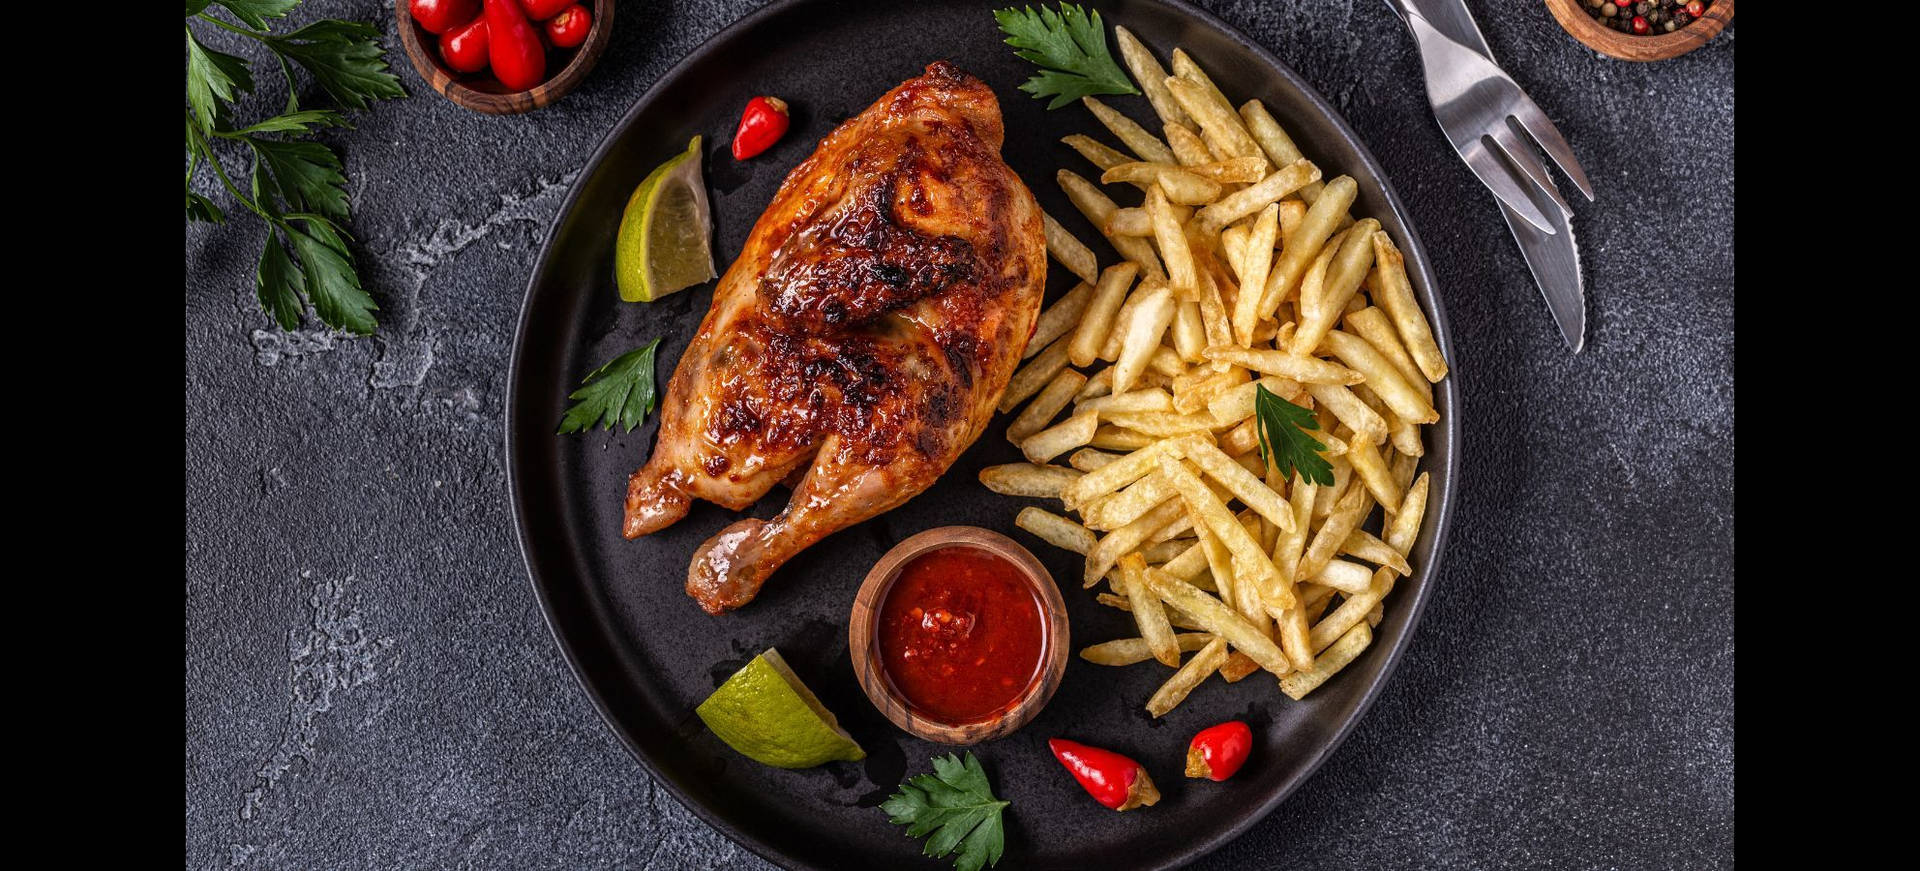 Sizzling Half-Roasted Peri Peri Chicken with French Fries Wallpaper